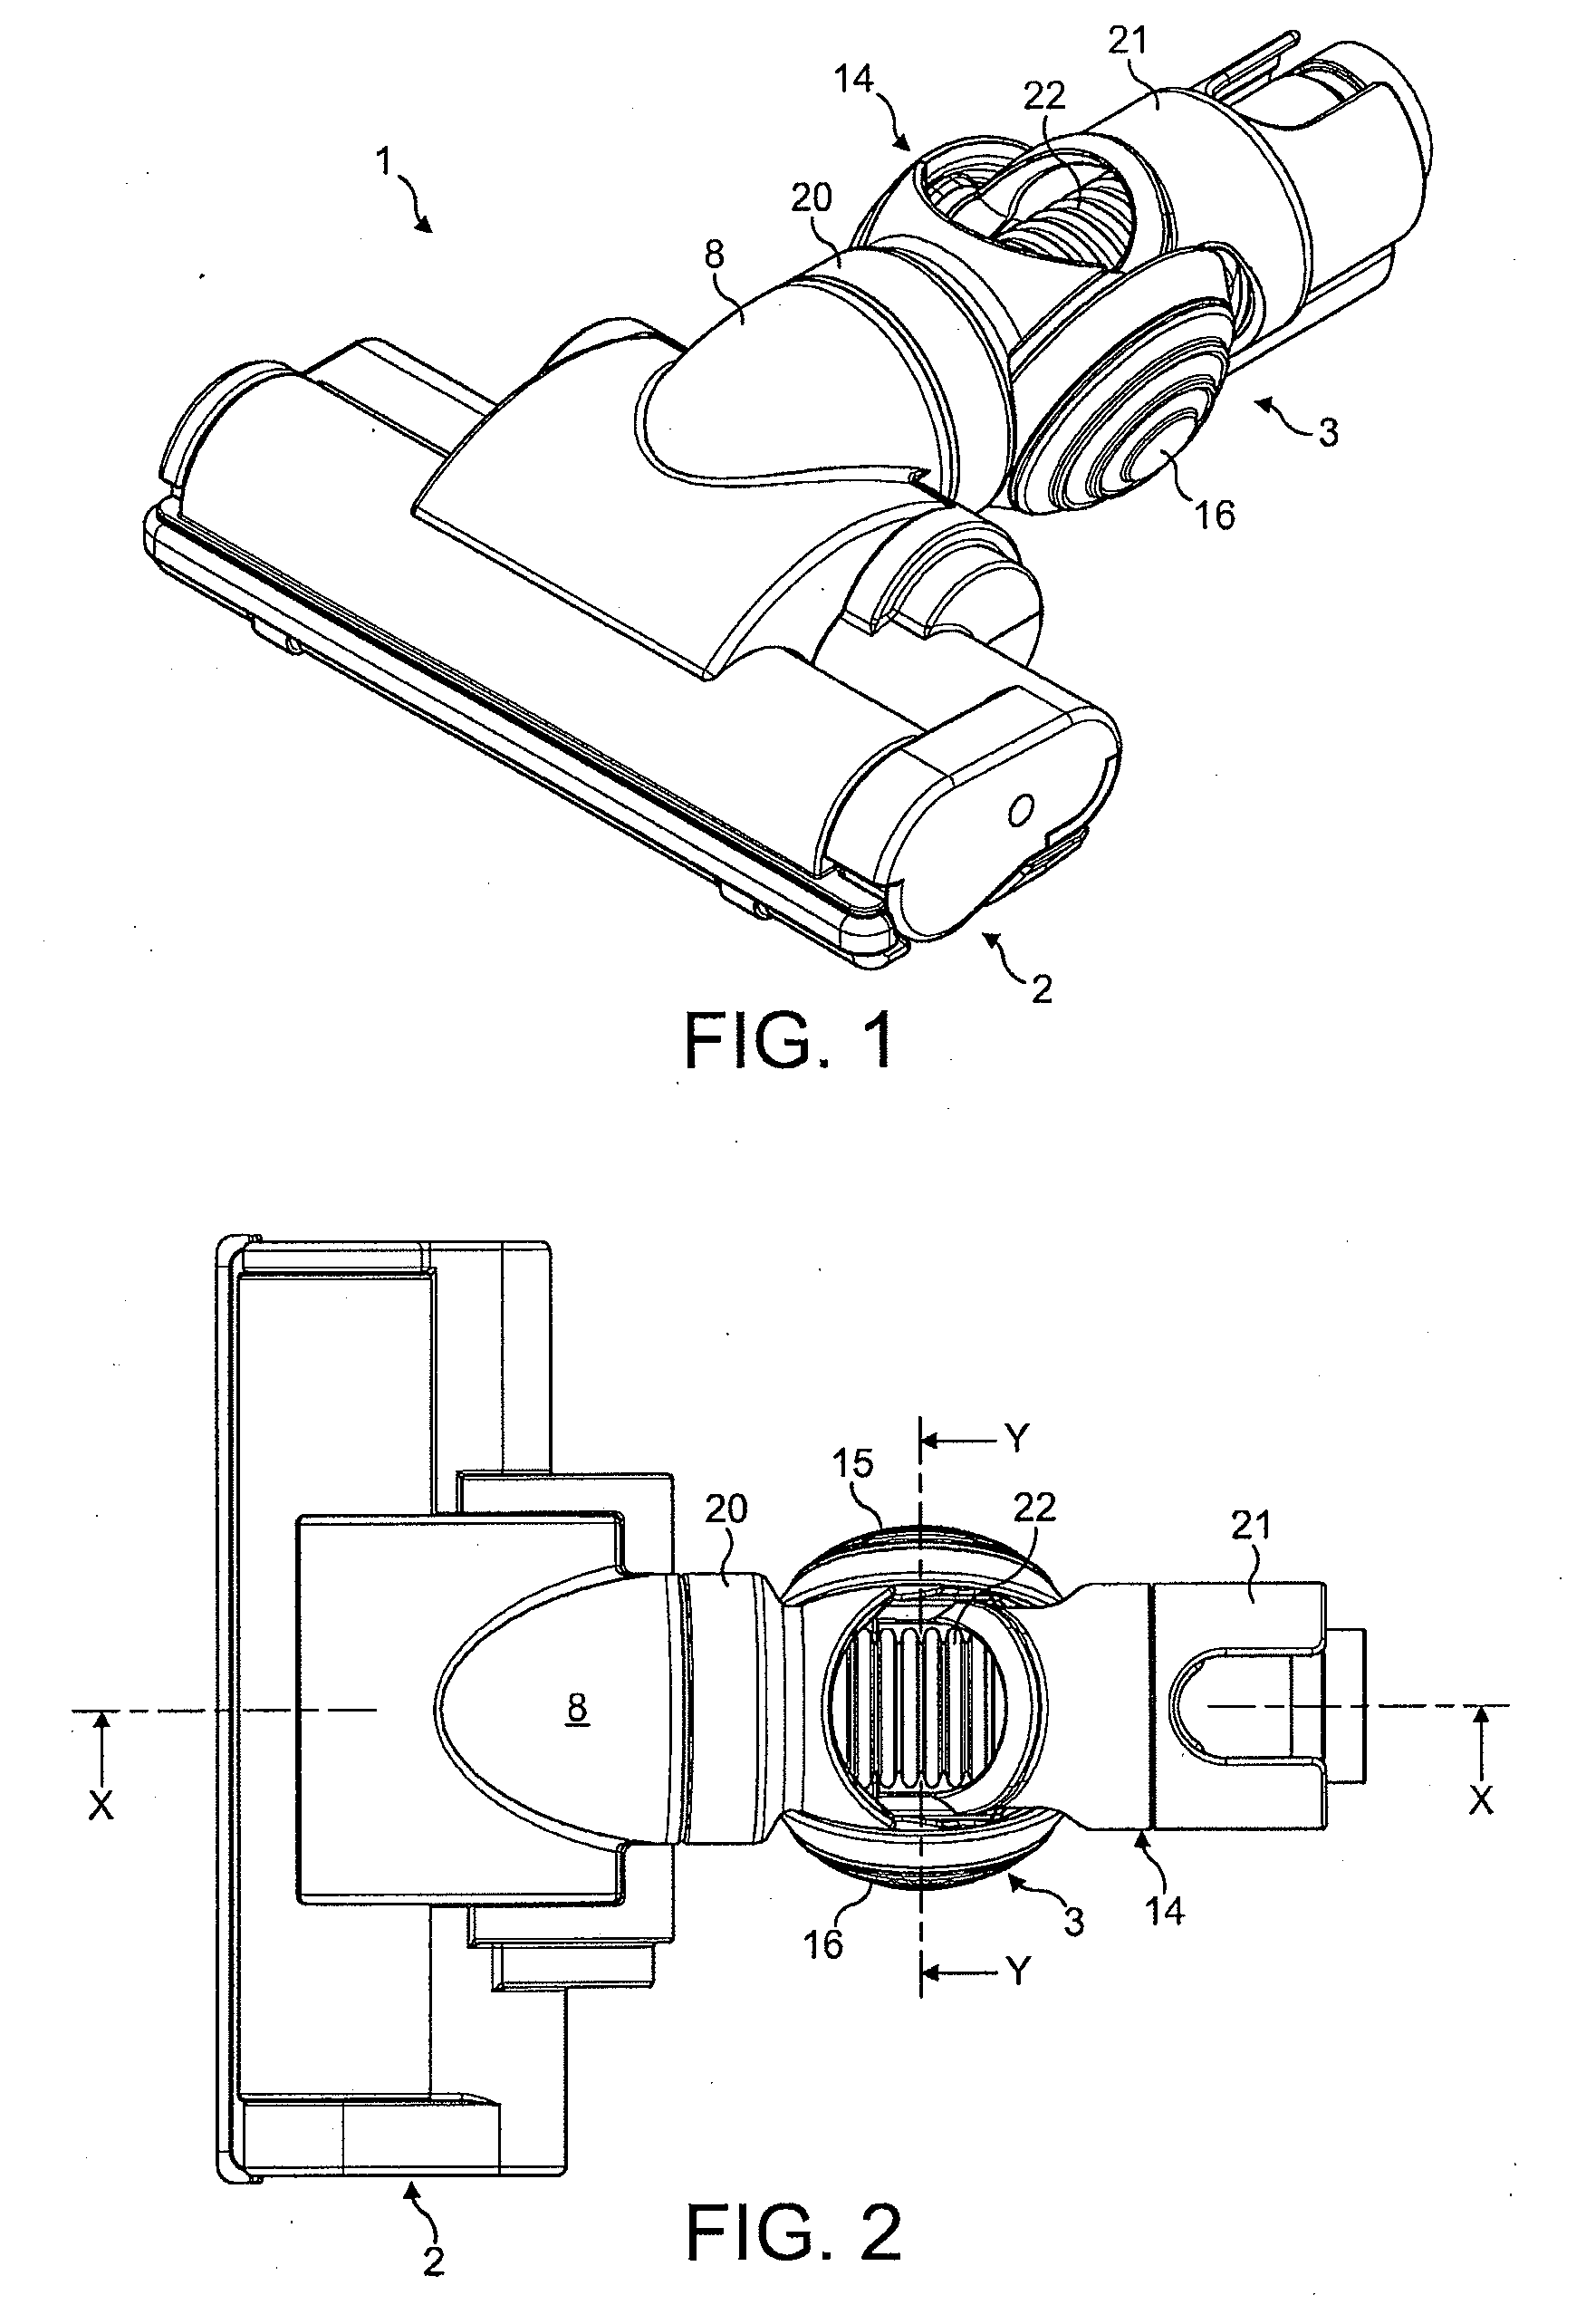 Floor tool for a cleaning appliance